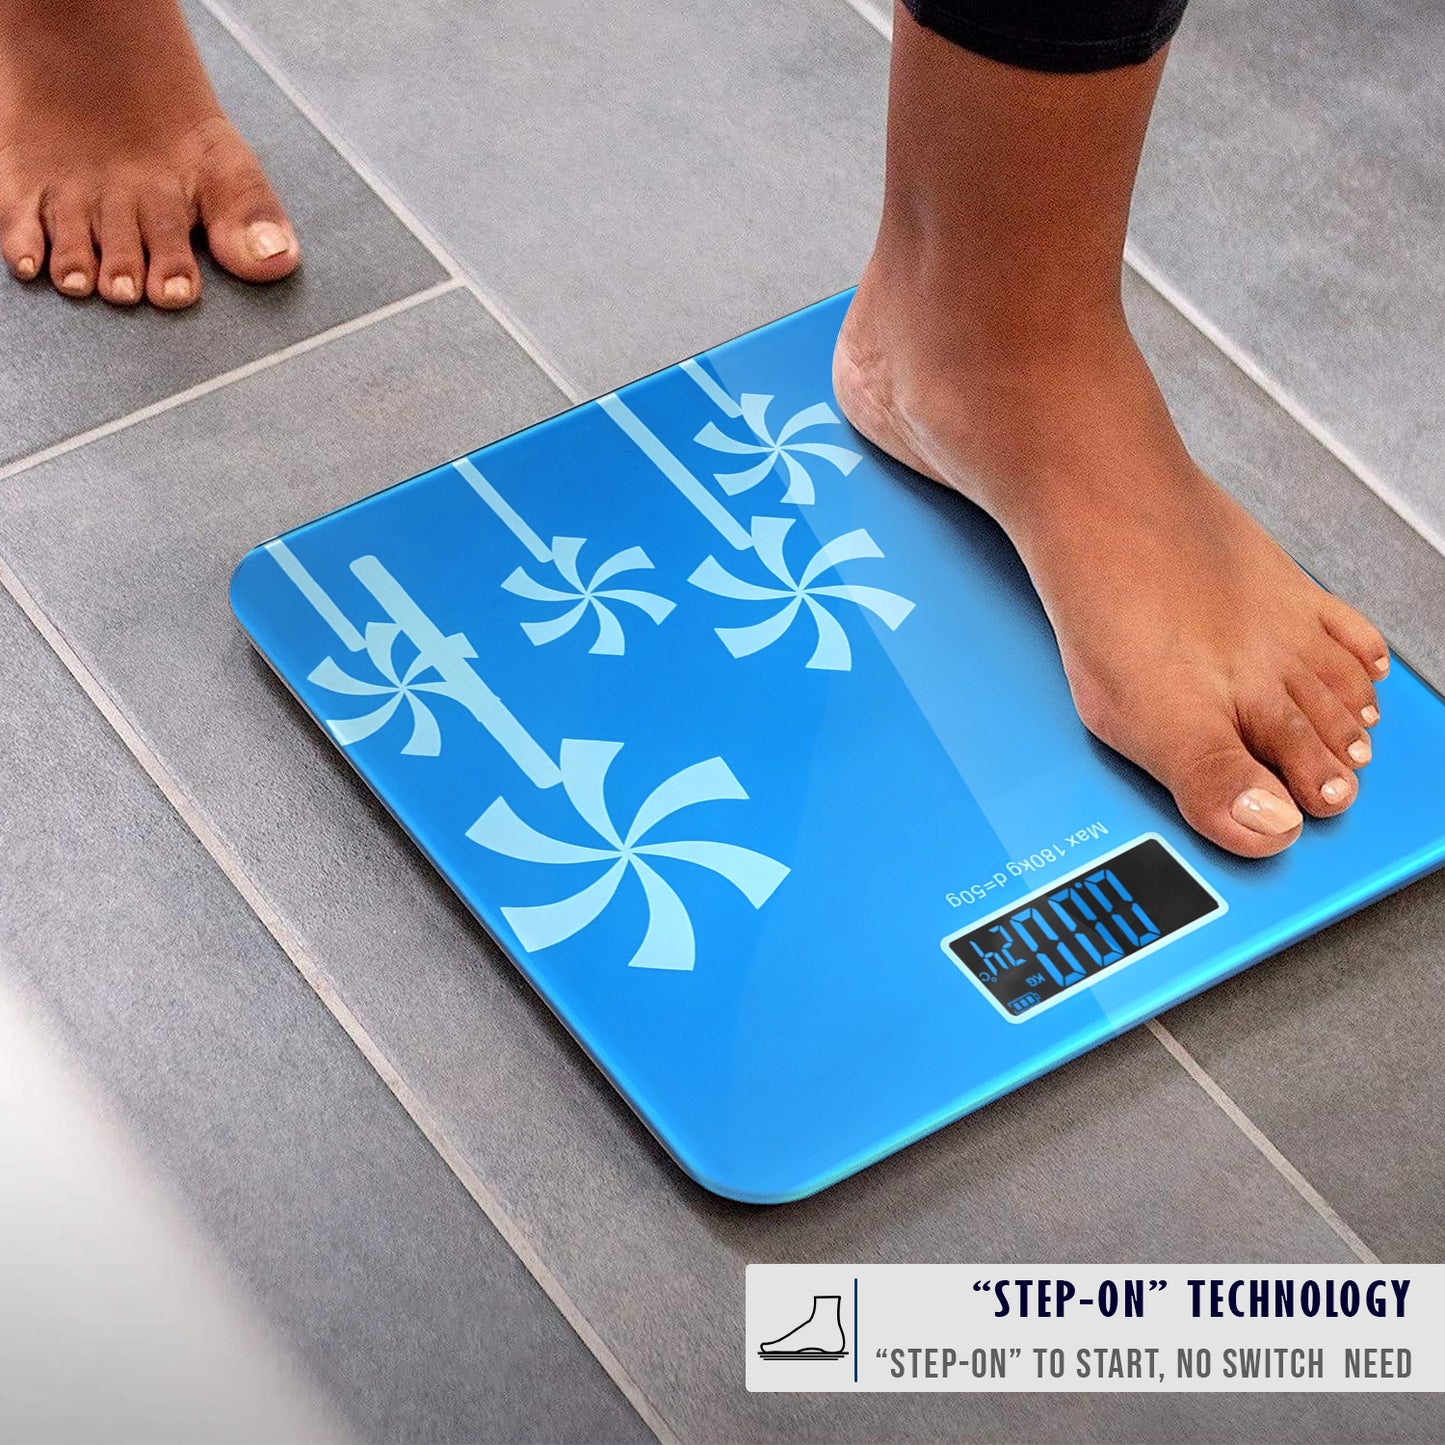 Printed Design Weighing Scale